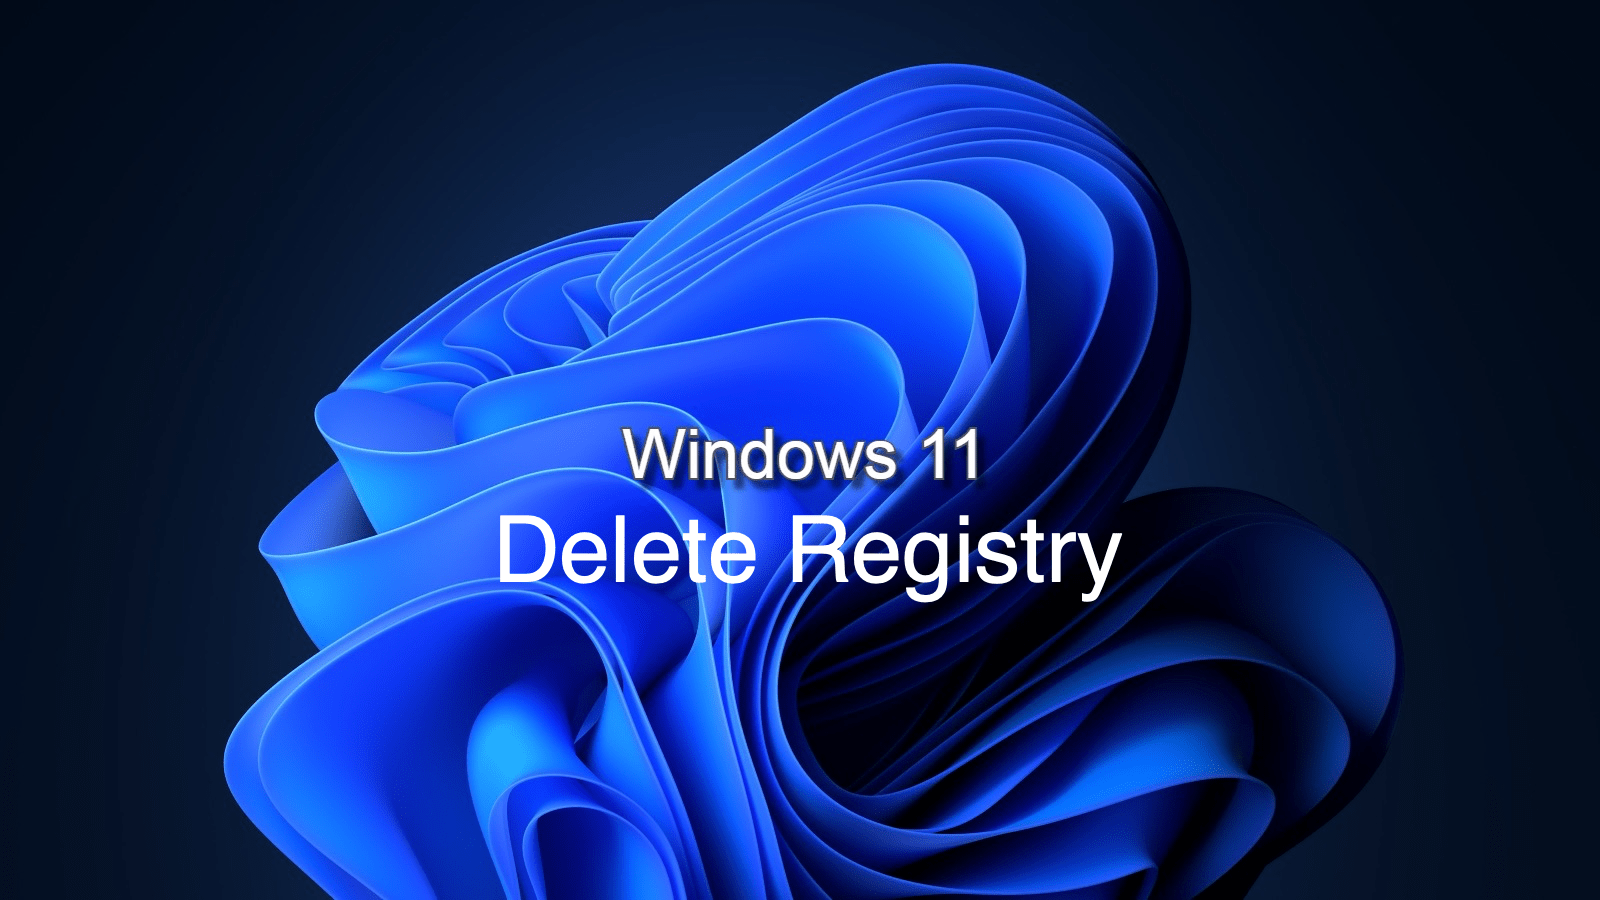 How to Delete the Registry in Windows 11